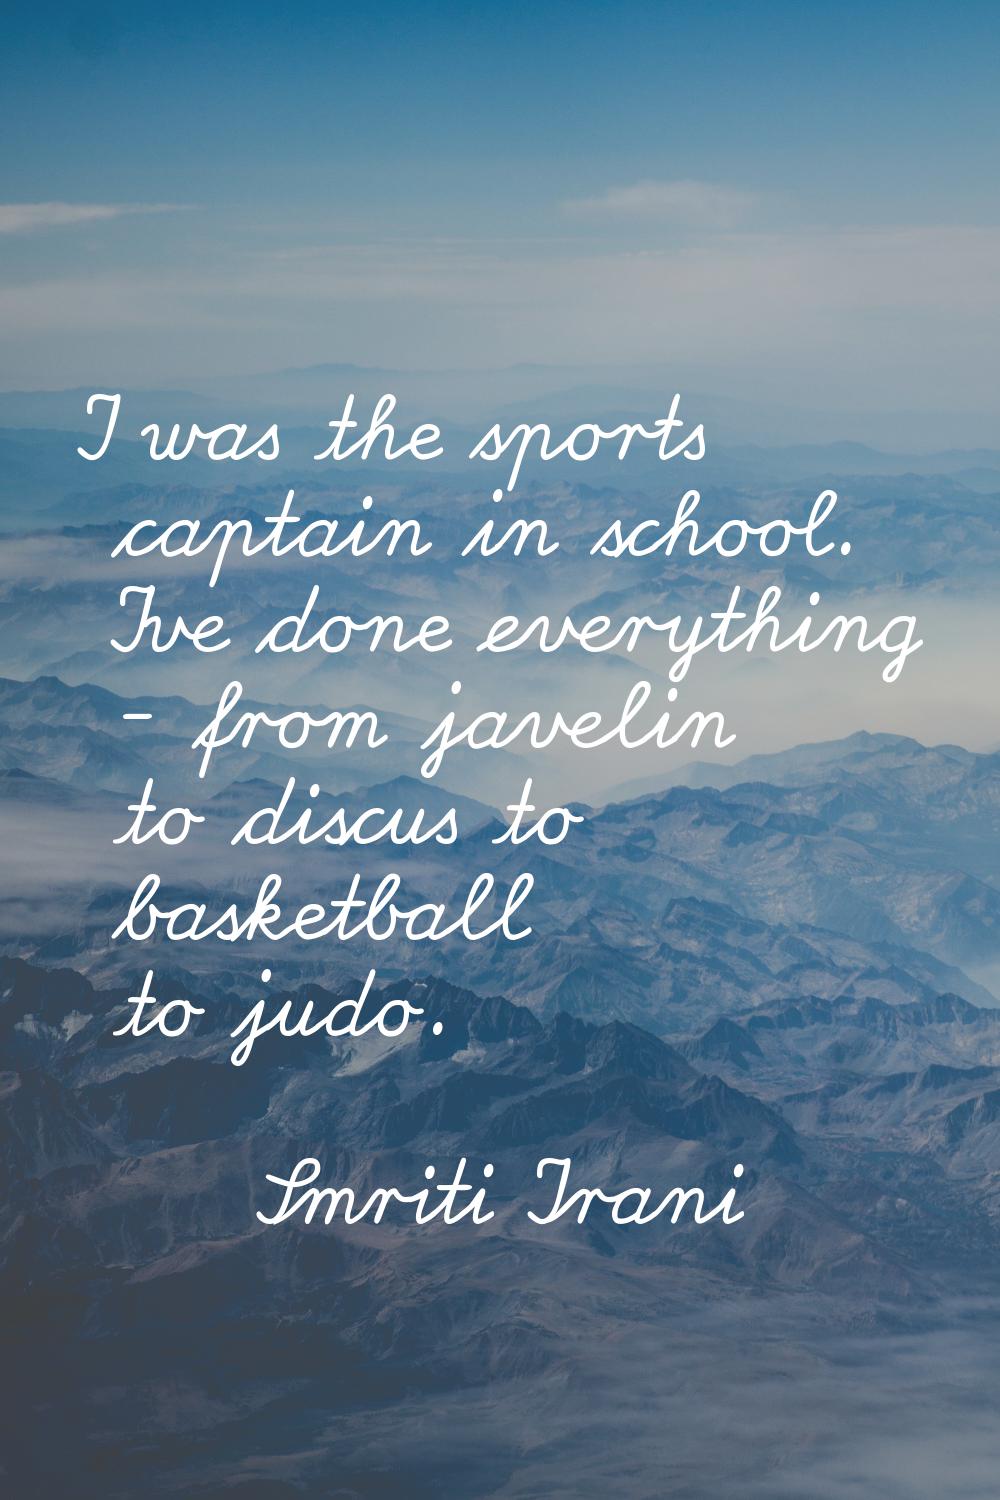 I was the sports captain in school. I've done everything - from javelin to discus to basketball to 